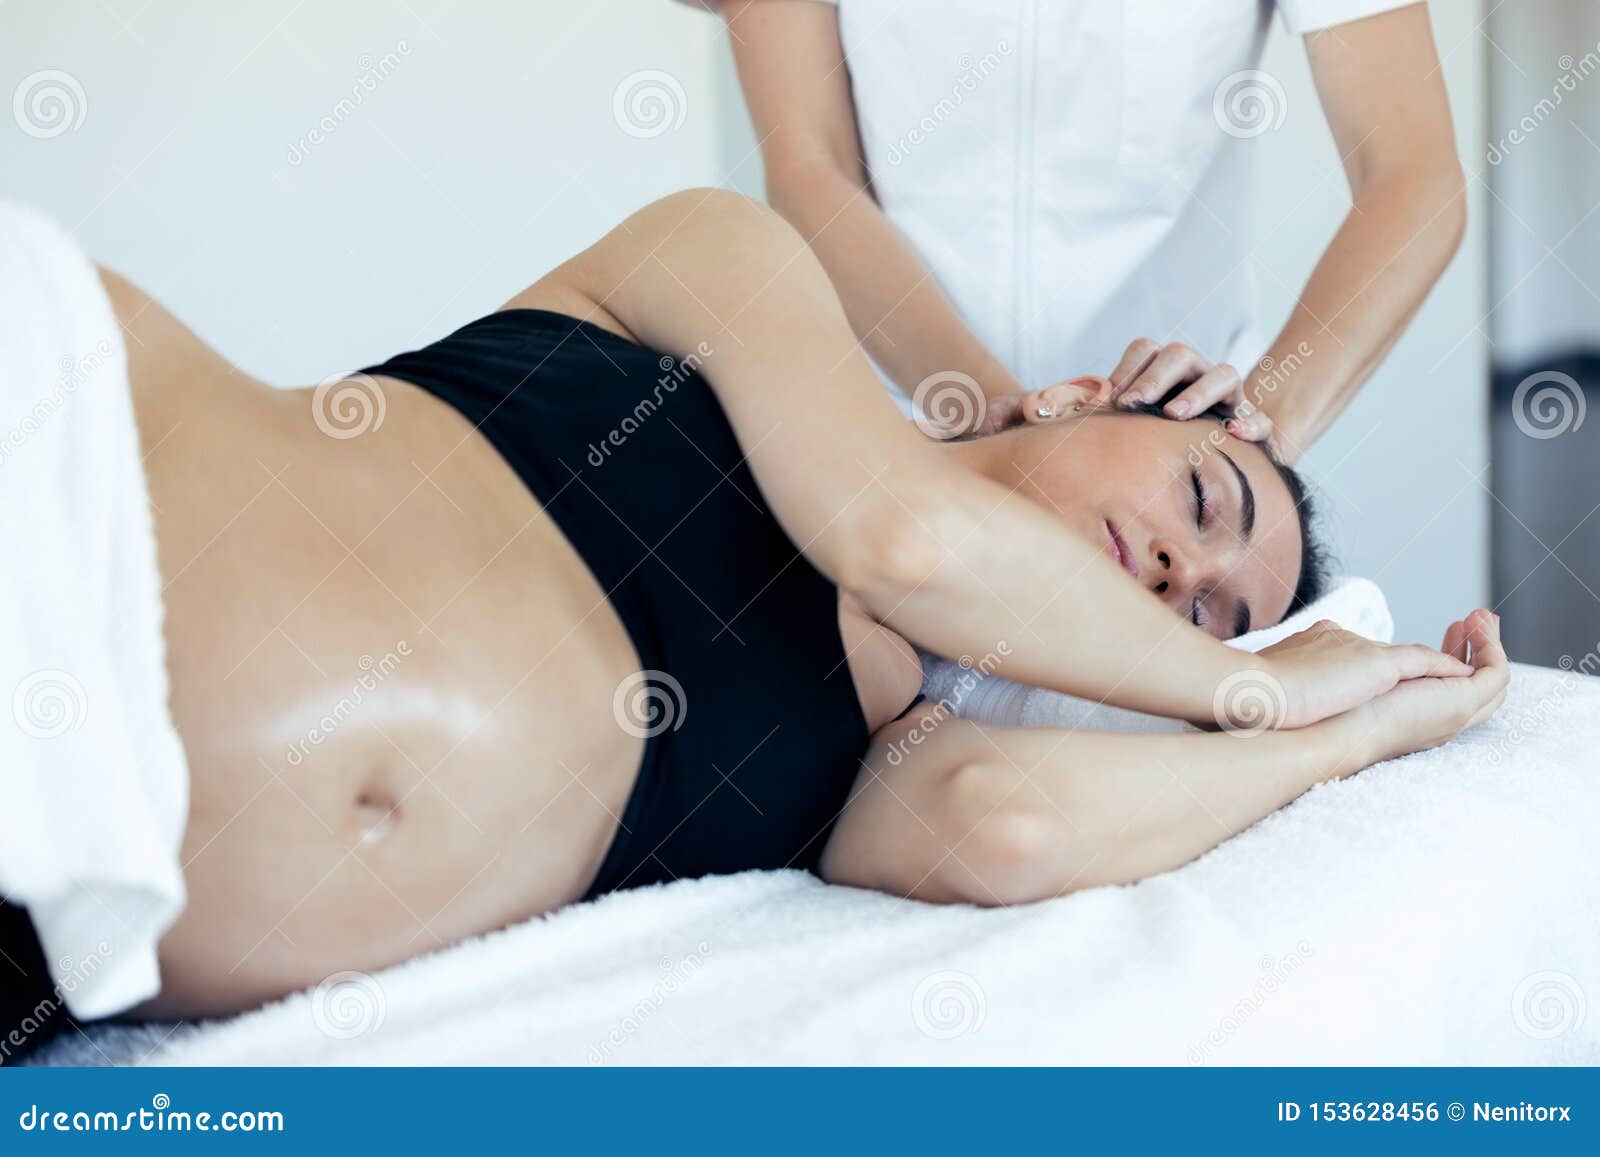 pregnant woman receiving osteopathic or chiropractic treatment in neck in a clinic